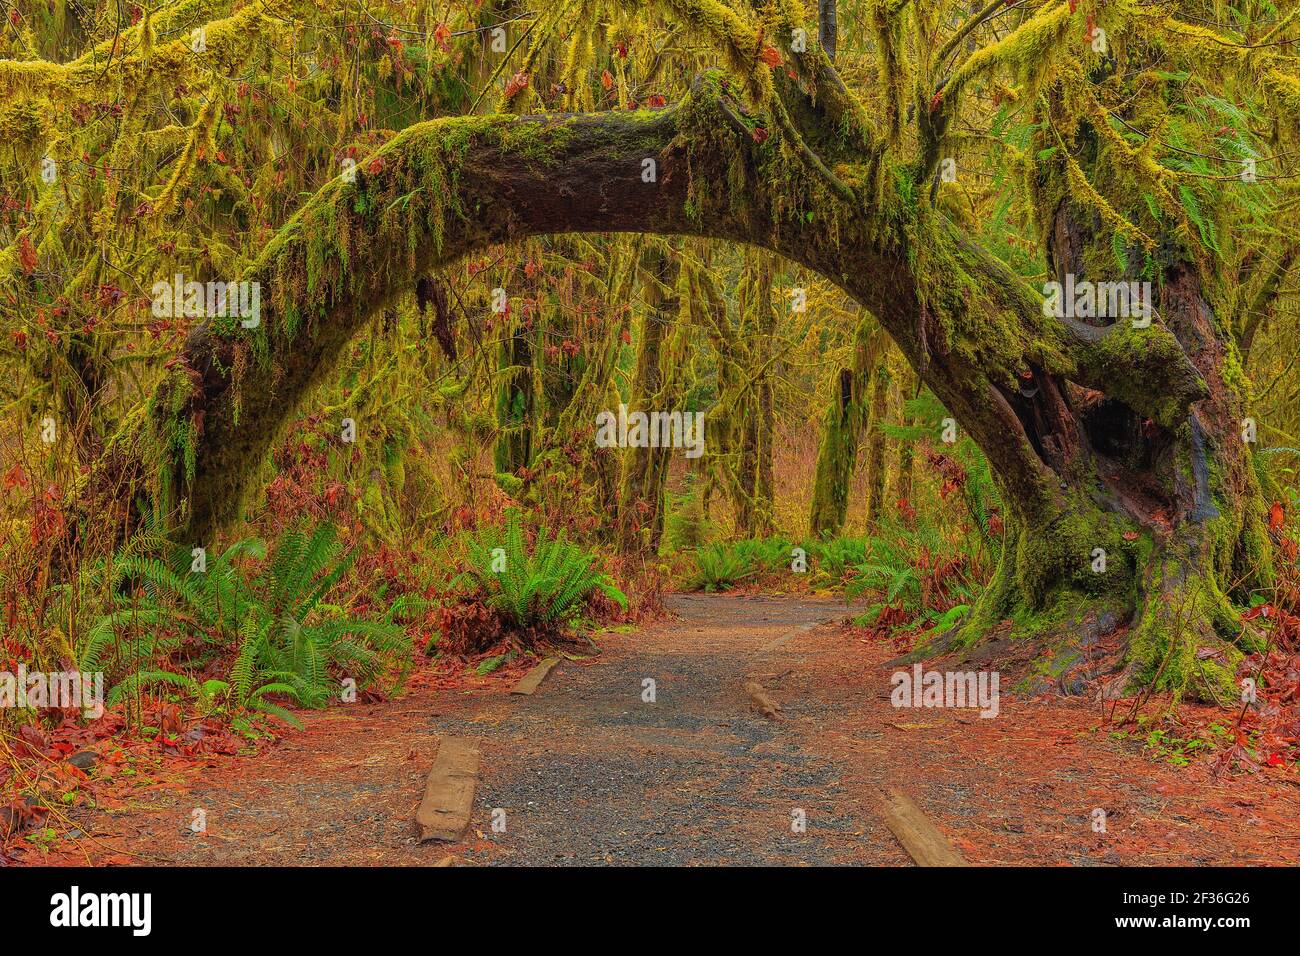 An arched tree in the Hoh Rainforest, WA. Stock Photo